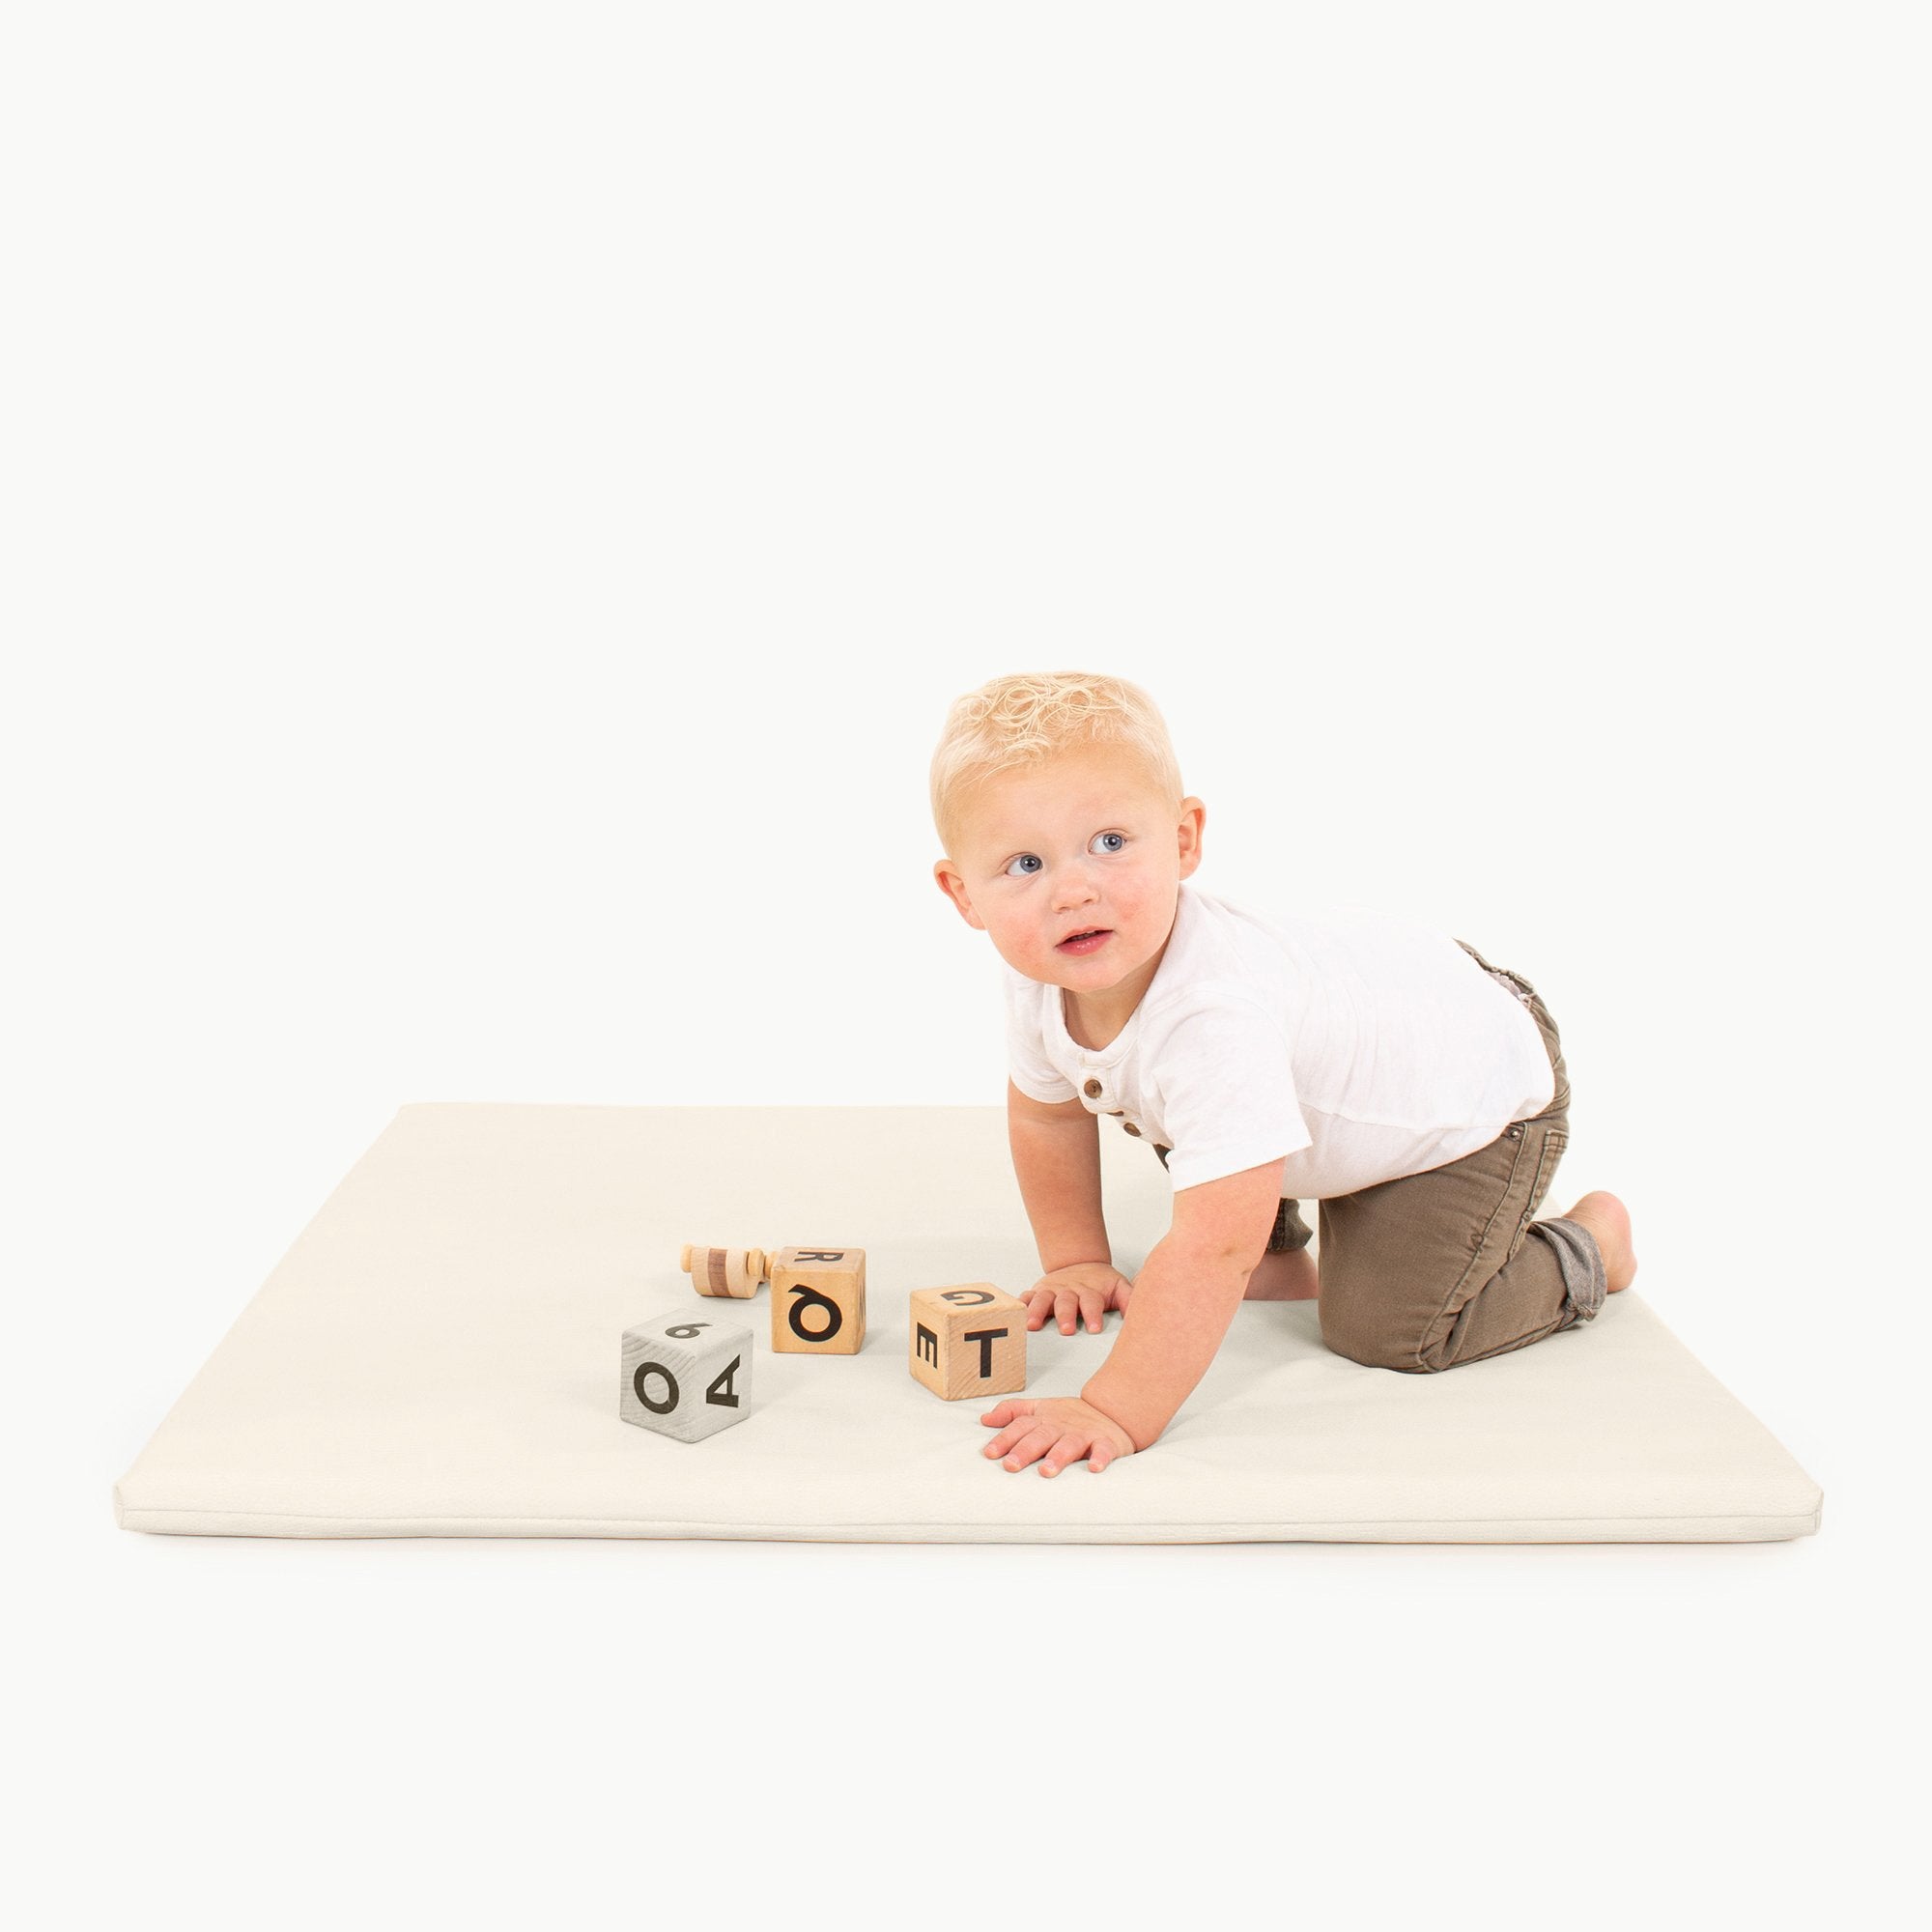 Ivory / Square@kid playing on the ivory padded mini square